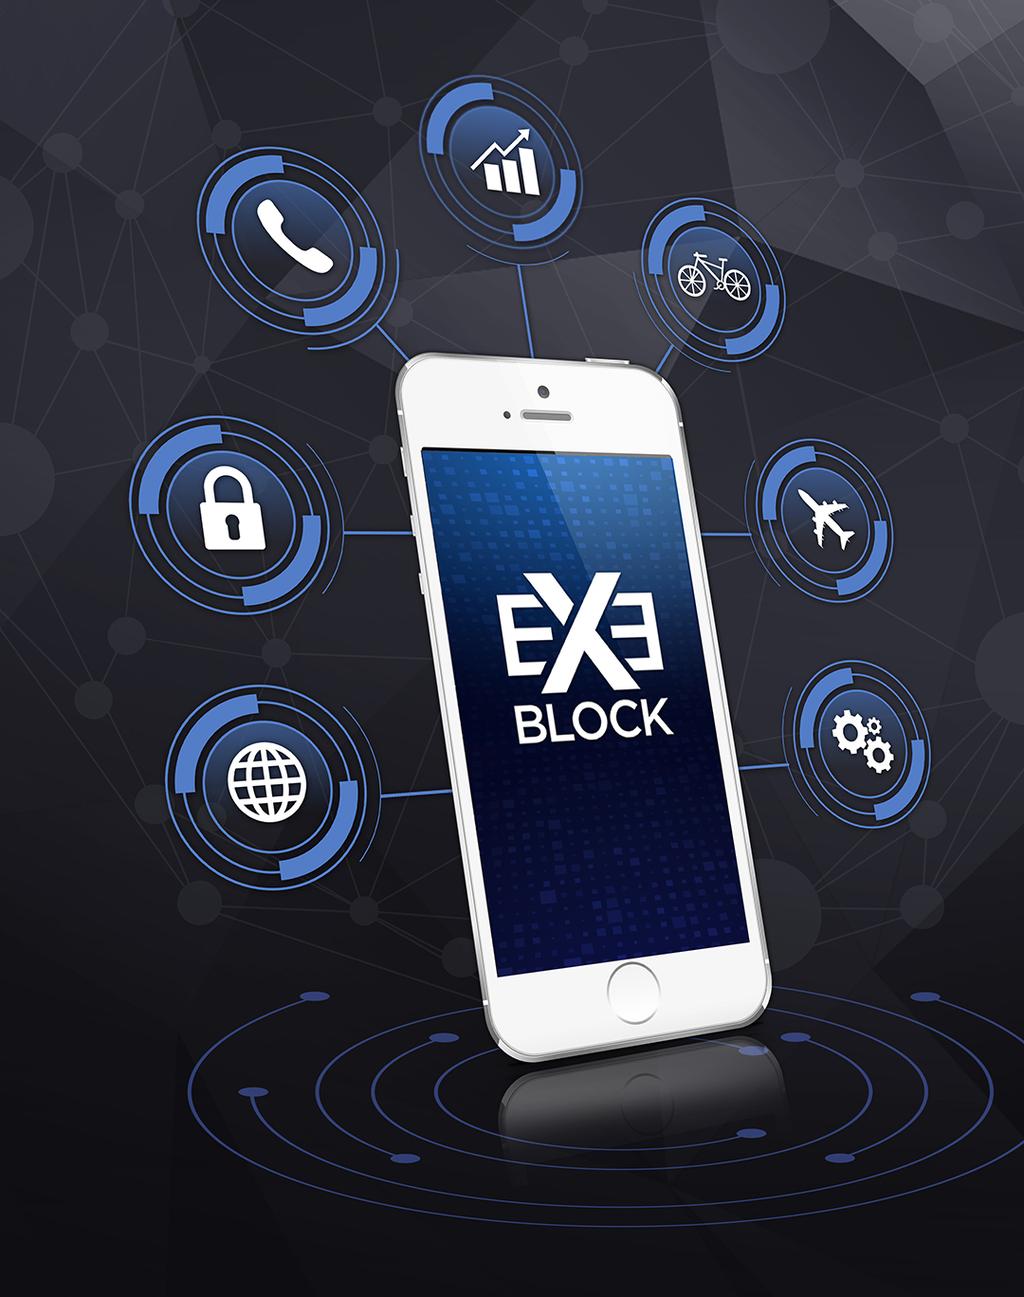 DApps Blockchain DApps control and distribute packets of encrypted information around the network. Blocks of data are relayed to all the devices connected to the network.